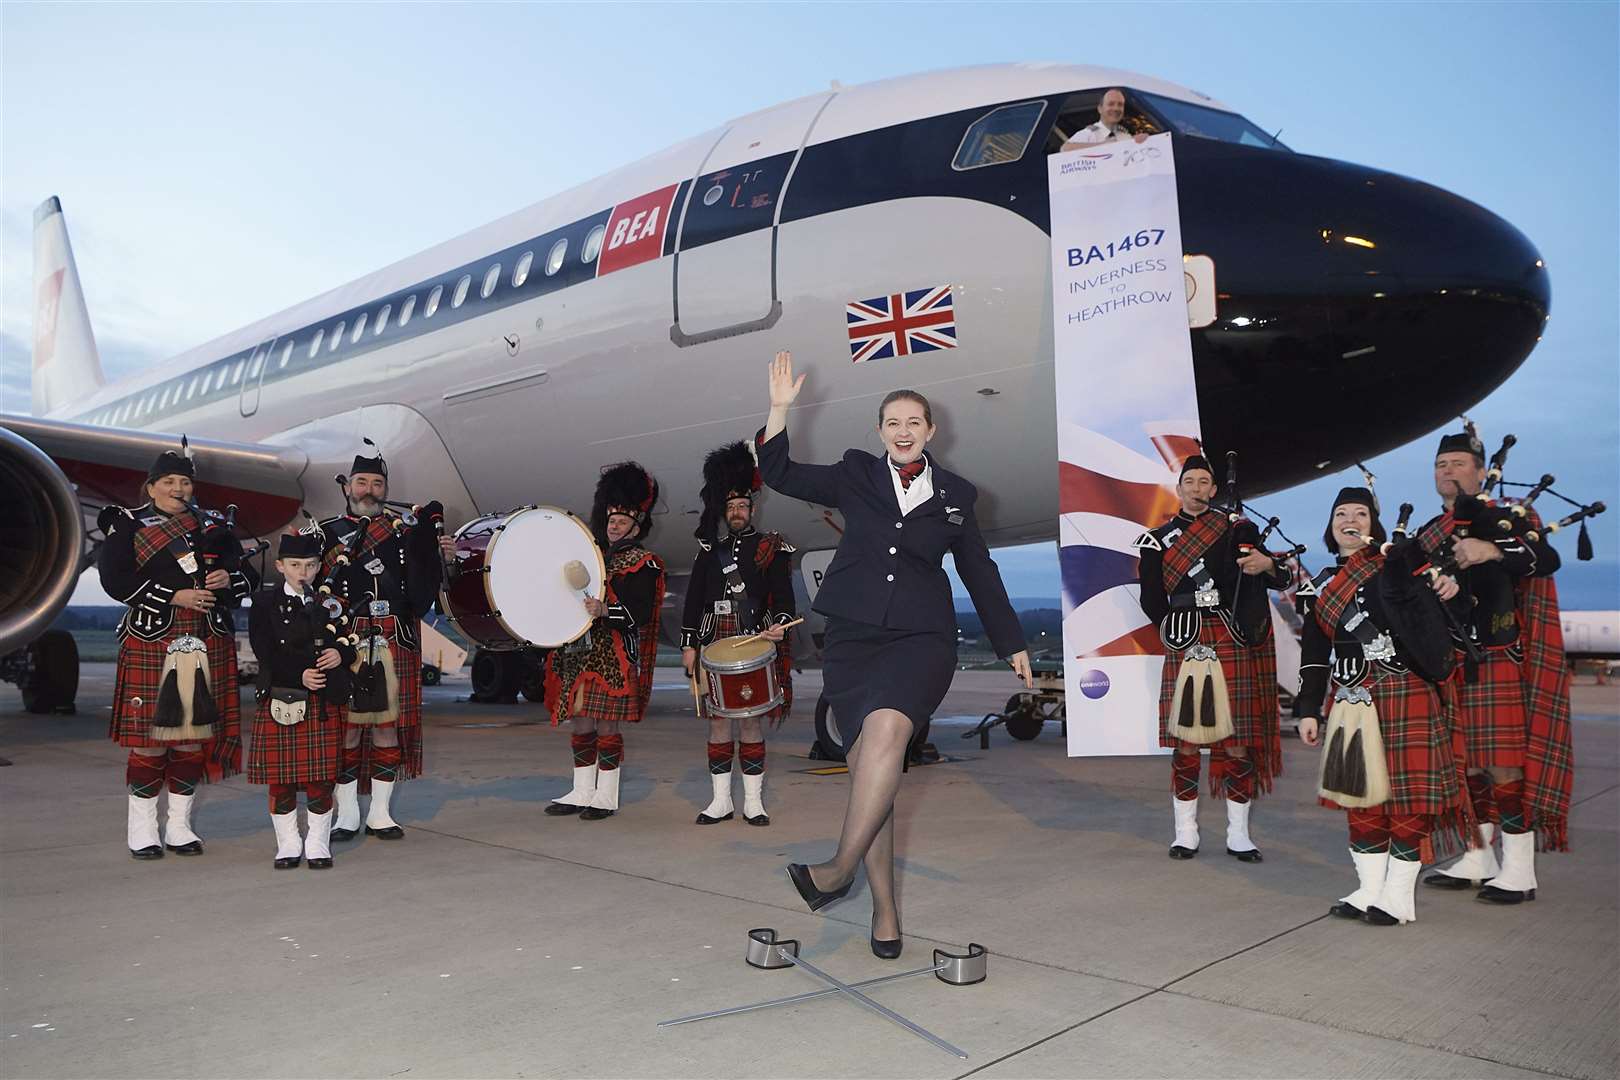 BA 's first early morning Heathrow Flight in 22 years was given a send of by the pipers of the Royal British Legion, Inverness.